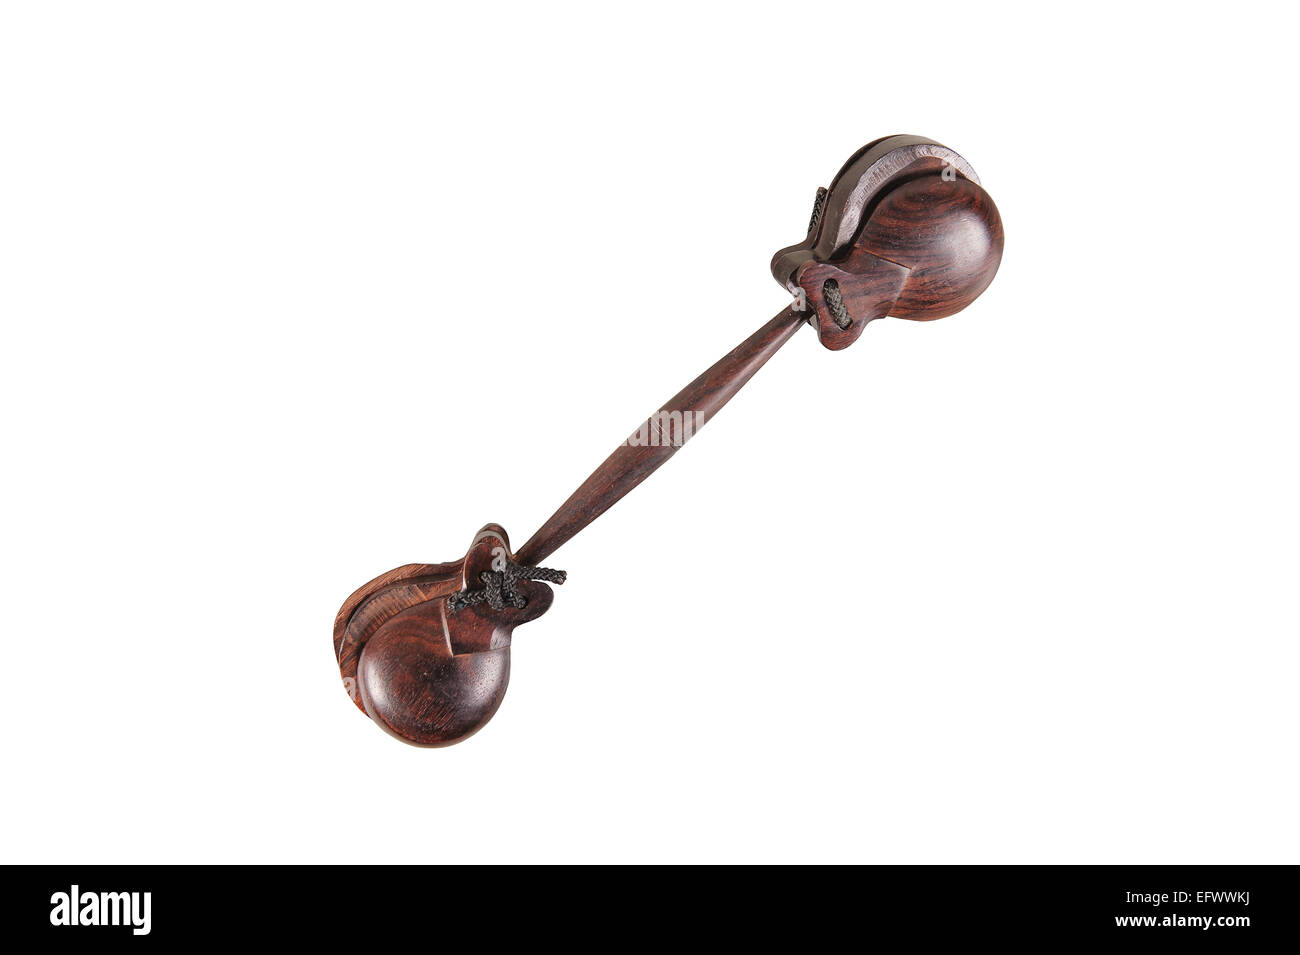 A Pair Of Castanets, Music Instruments, Rhythm Marker. Stock Photo, Picture  and Royalty Free Image. Image 94578584.